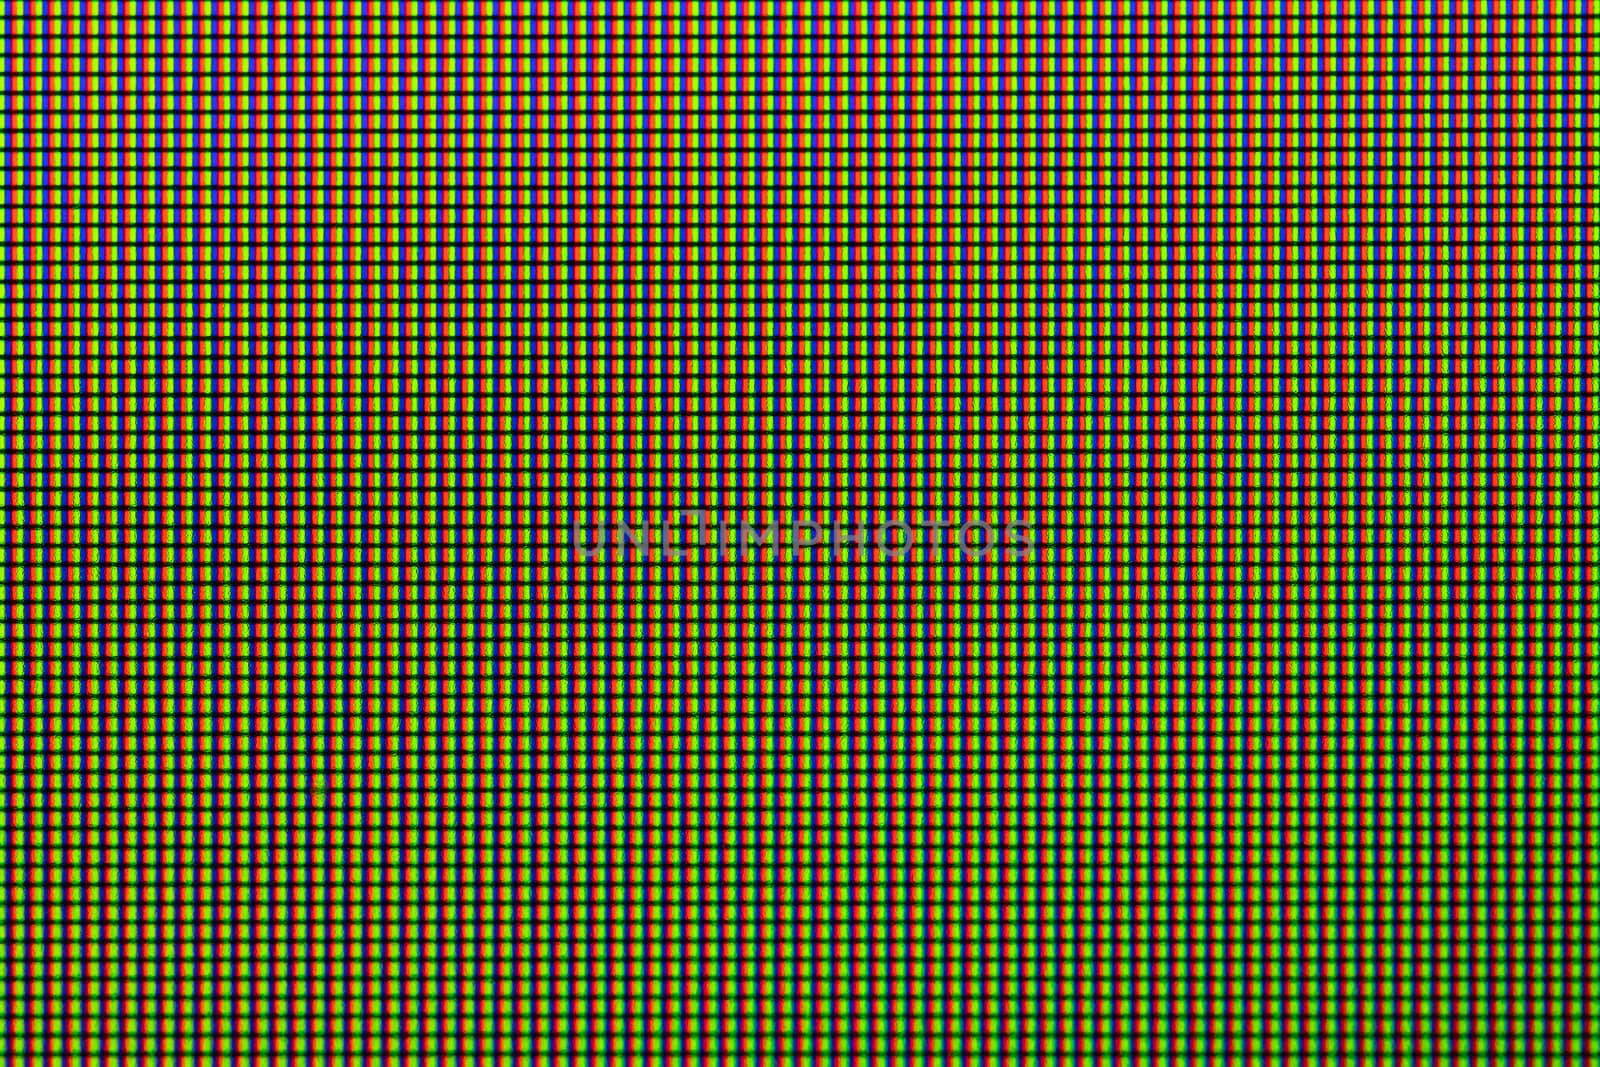 Closeup LED diode from LED computer monitor screen display panel for design.